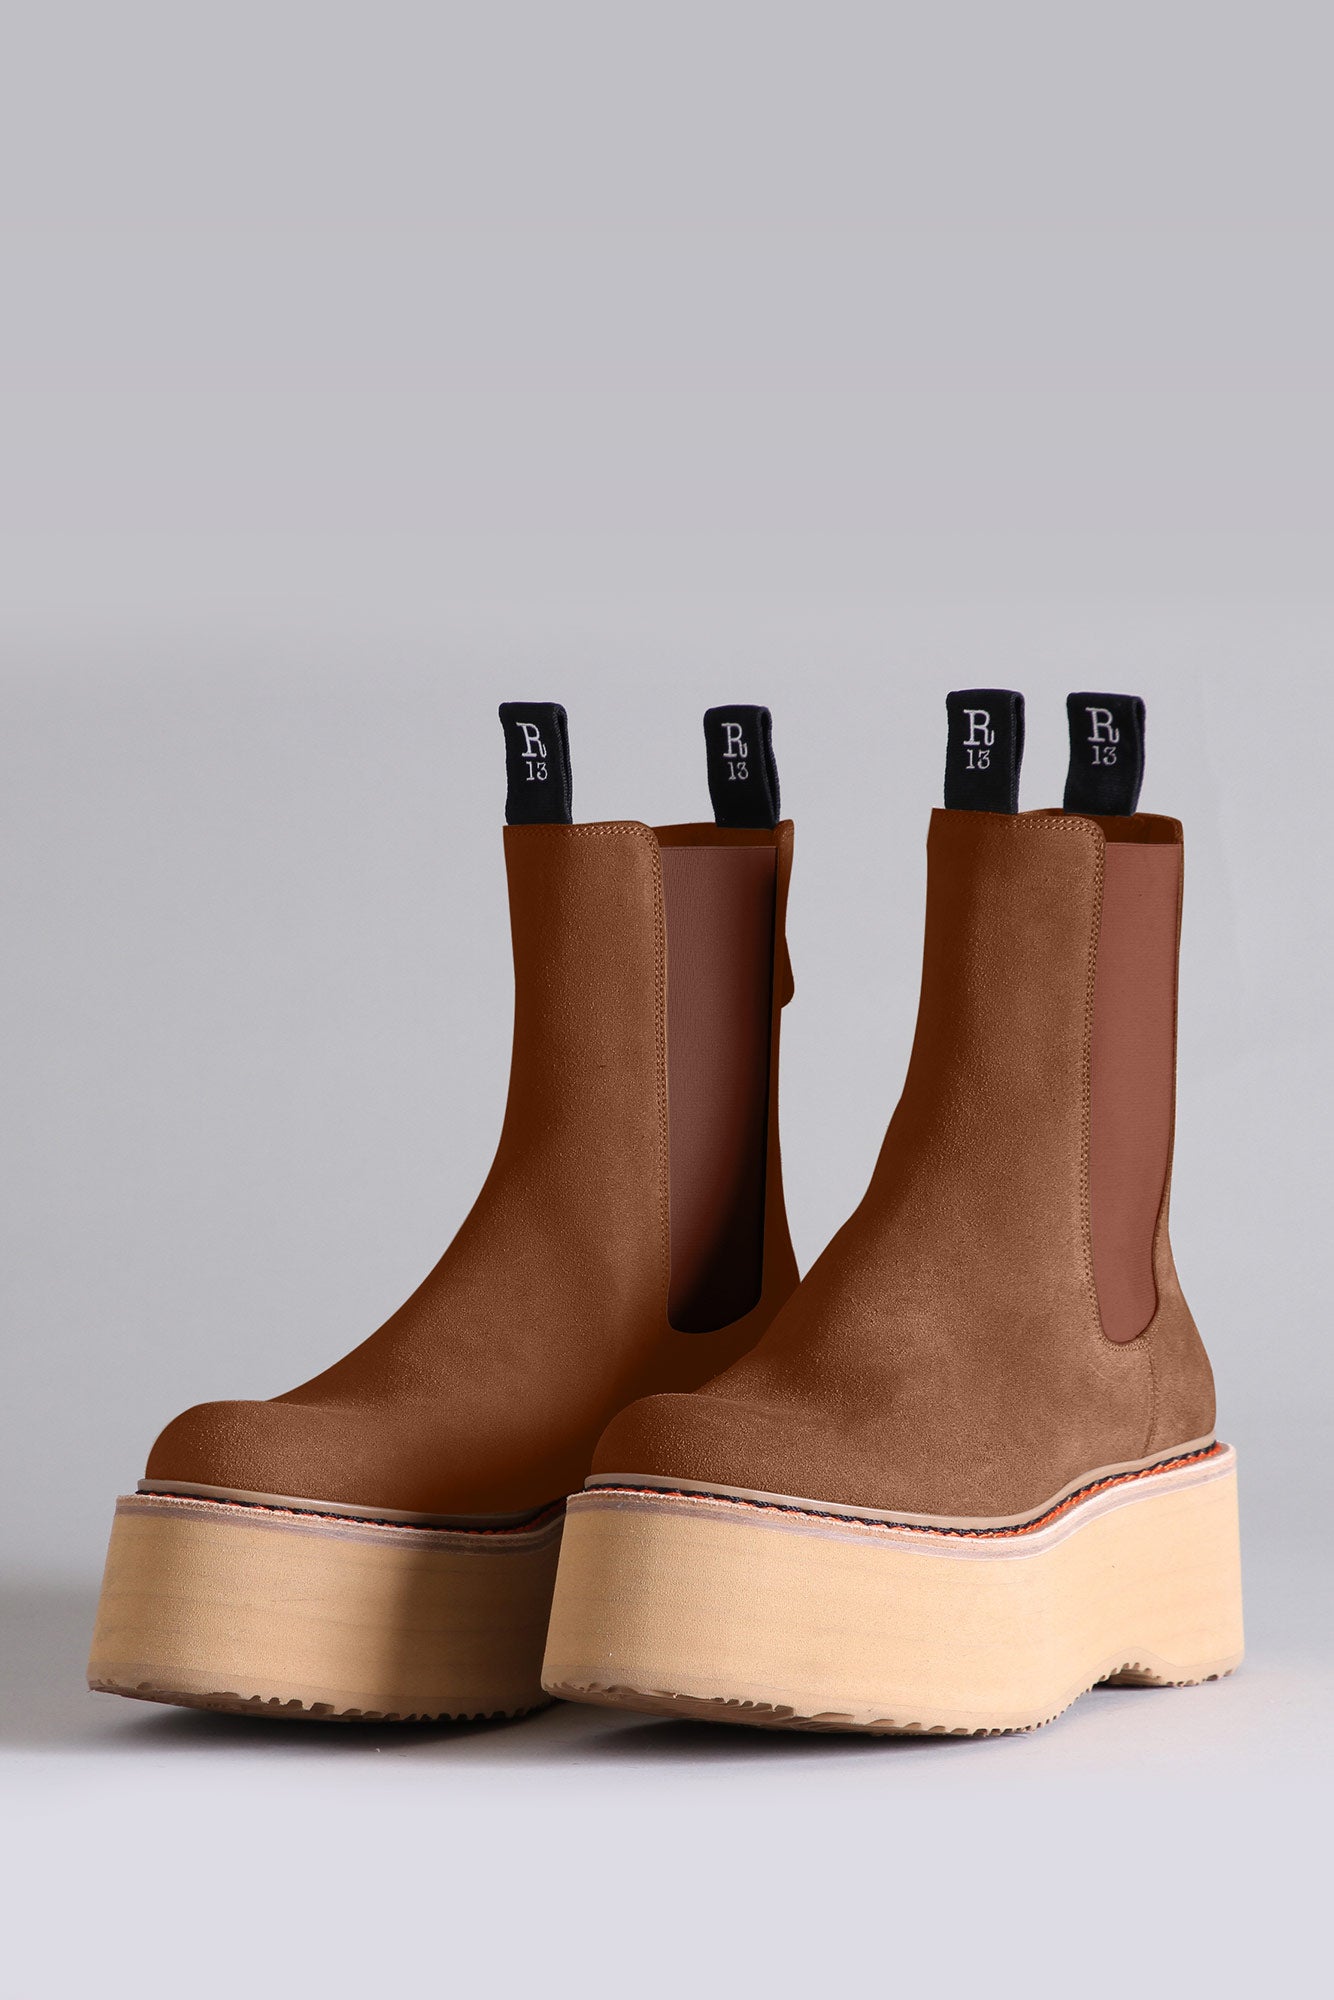 DOUBLE STACK CHELSEA BOOT - BROWN SUEDE